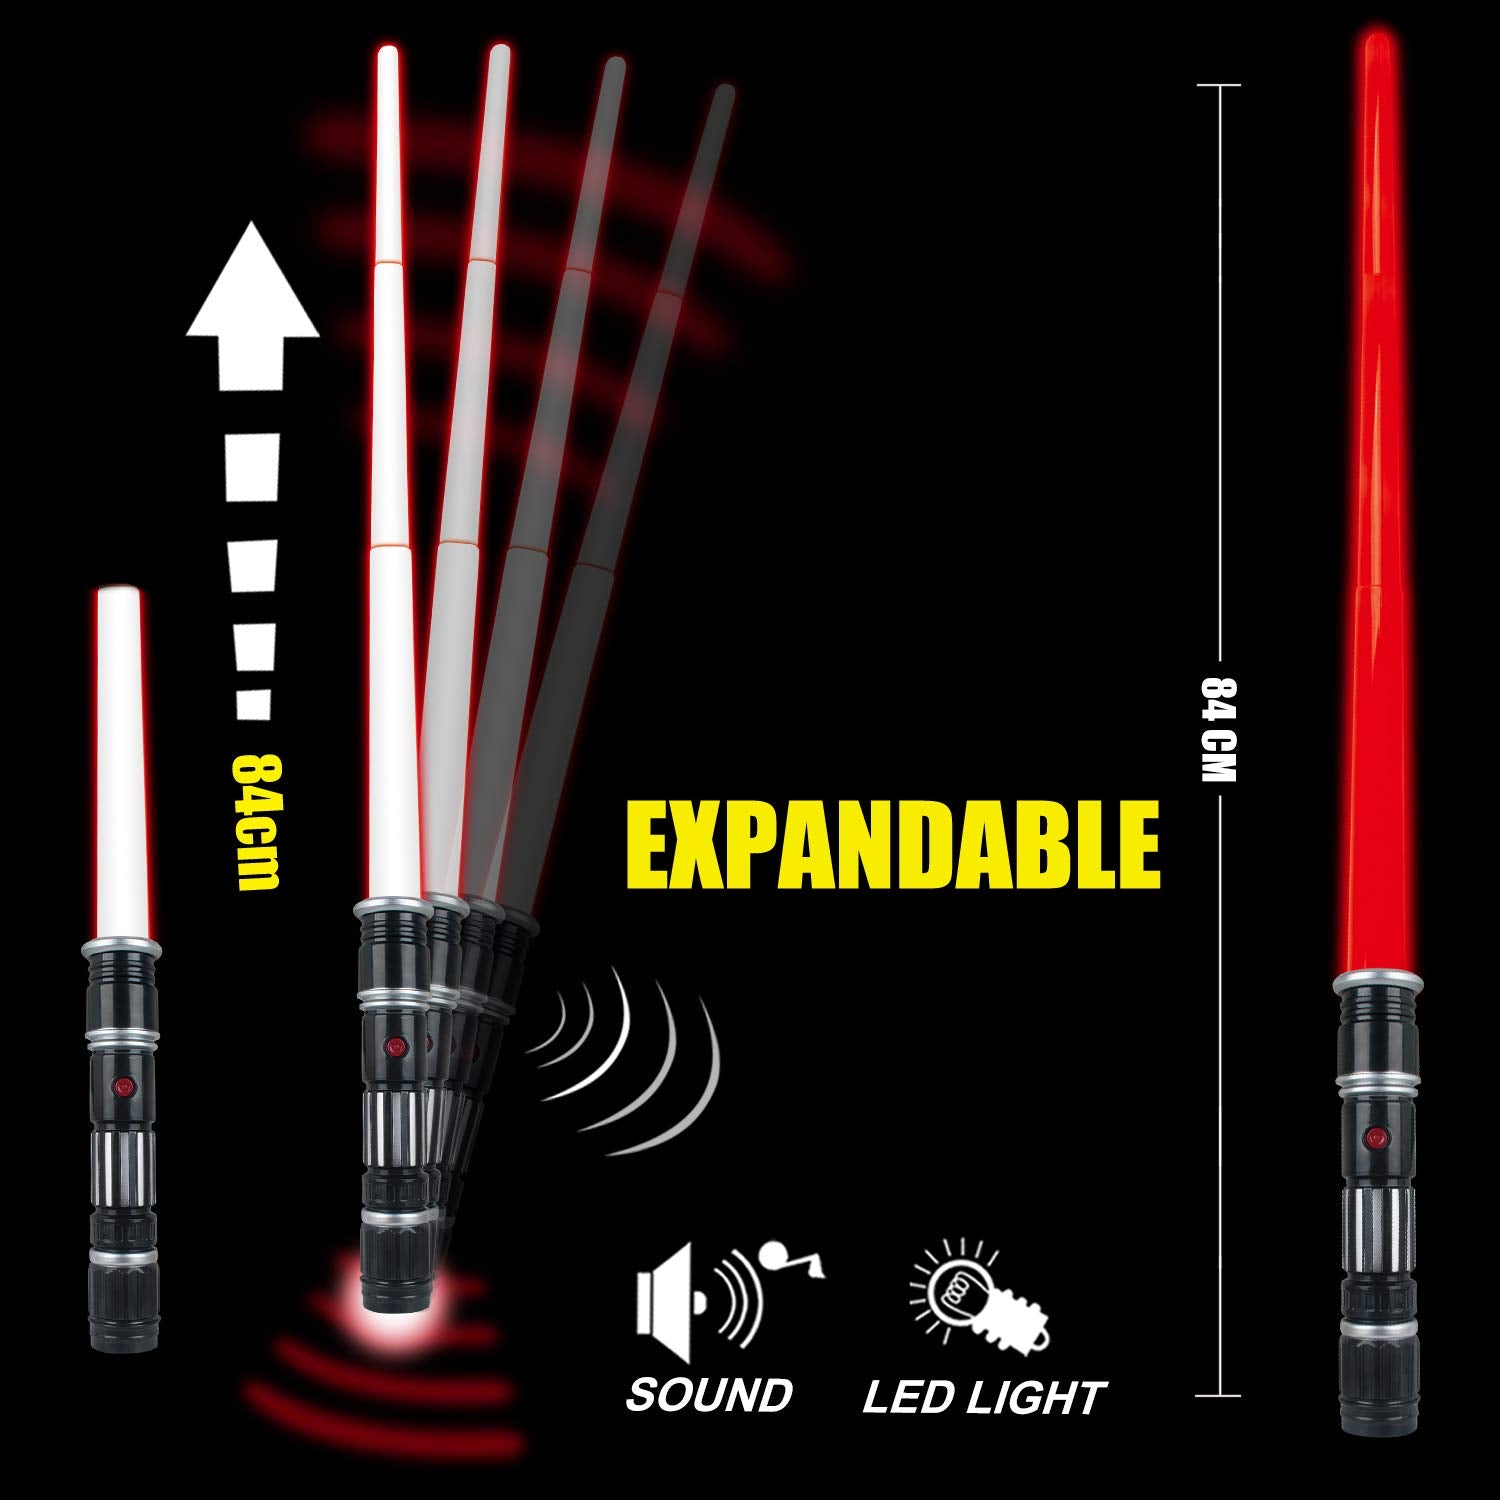 3 pack 3 colors Light Up Saber with FX Sound(Motion Sensitive) and Realistic Handle for Kid, Expandable Light Swords Set for Halloween Dress Up Parties, Xmas Present, Galaxy War Fighters and Warriors